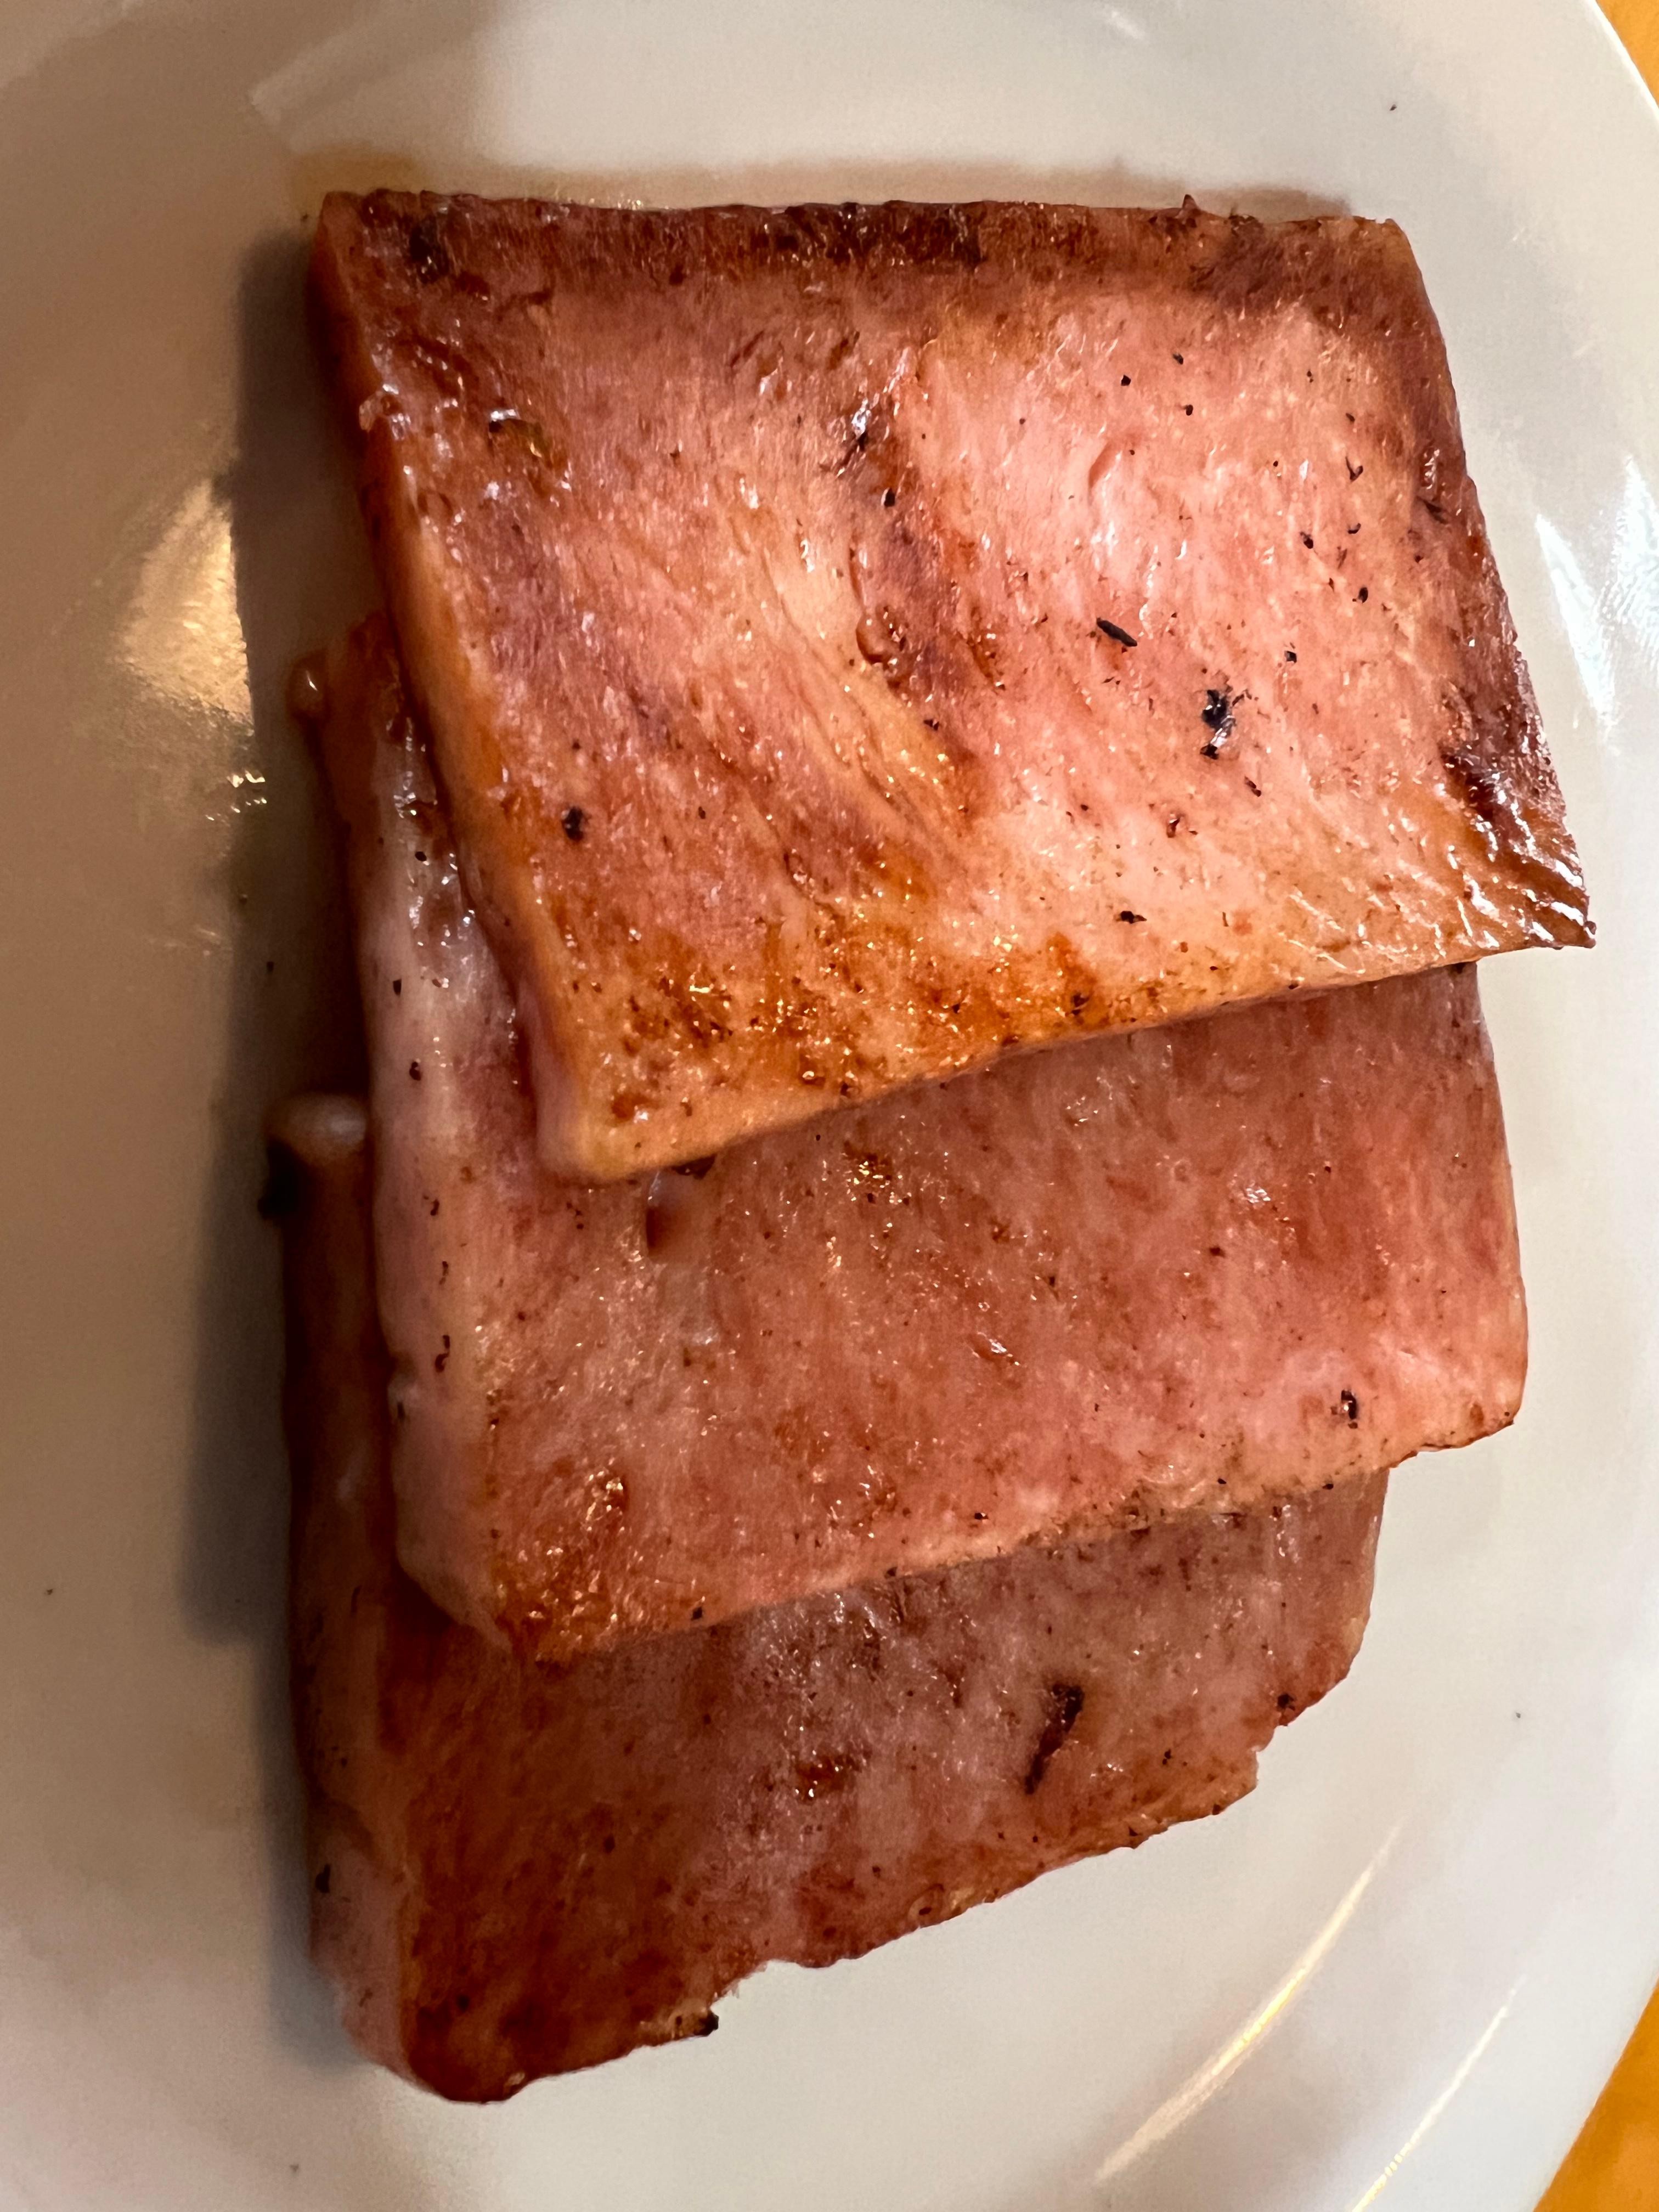 FRIED SPAM - 3 SLICES